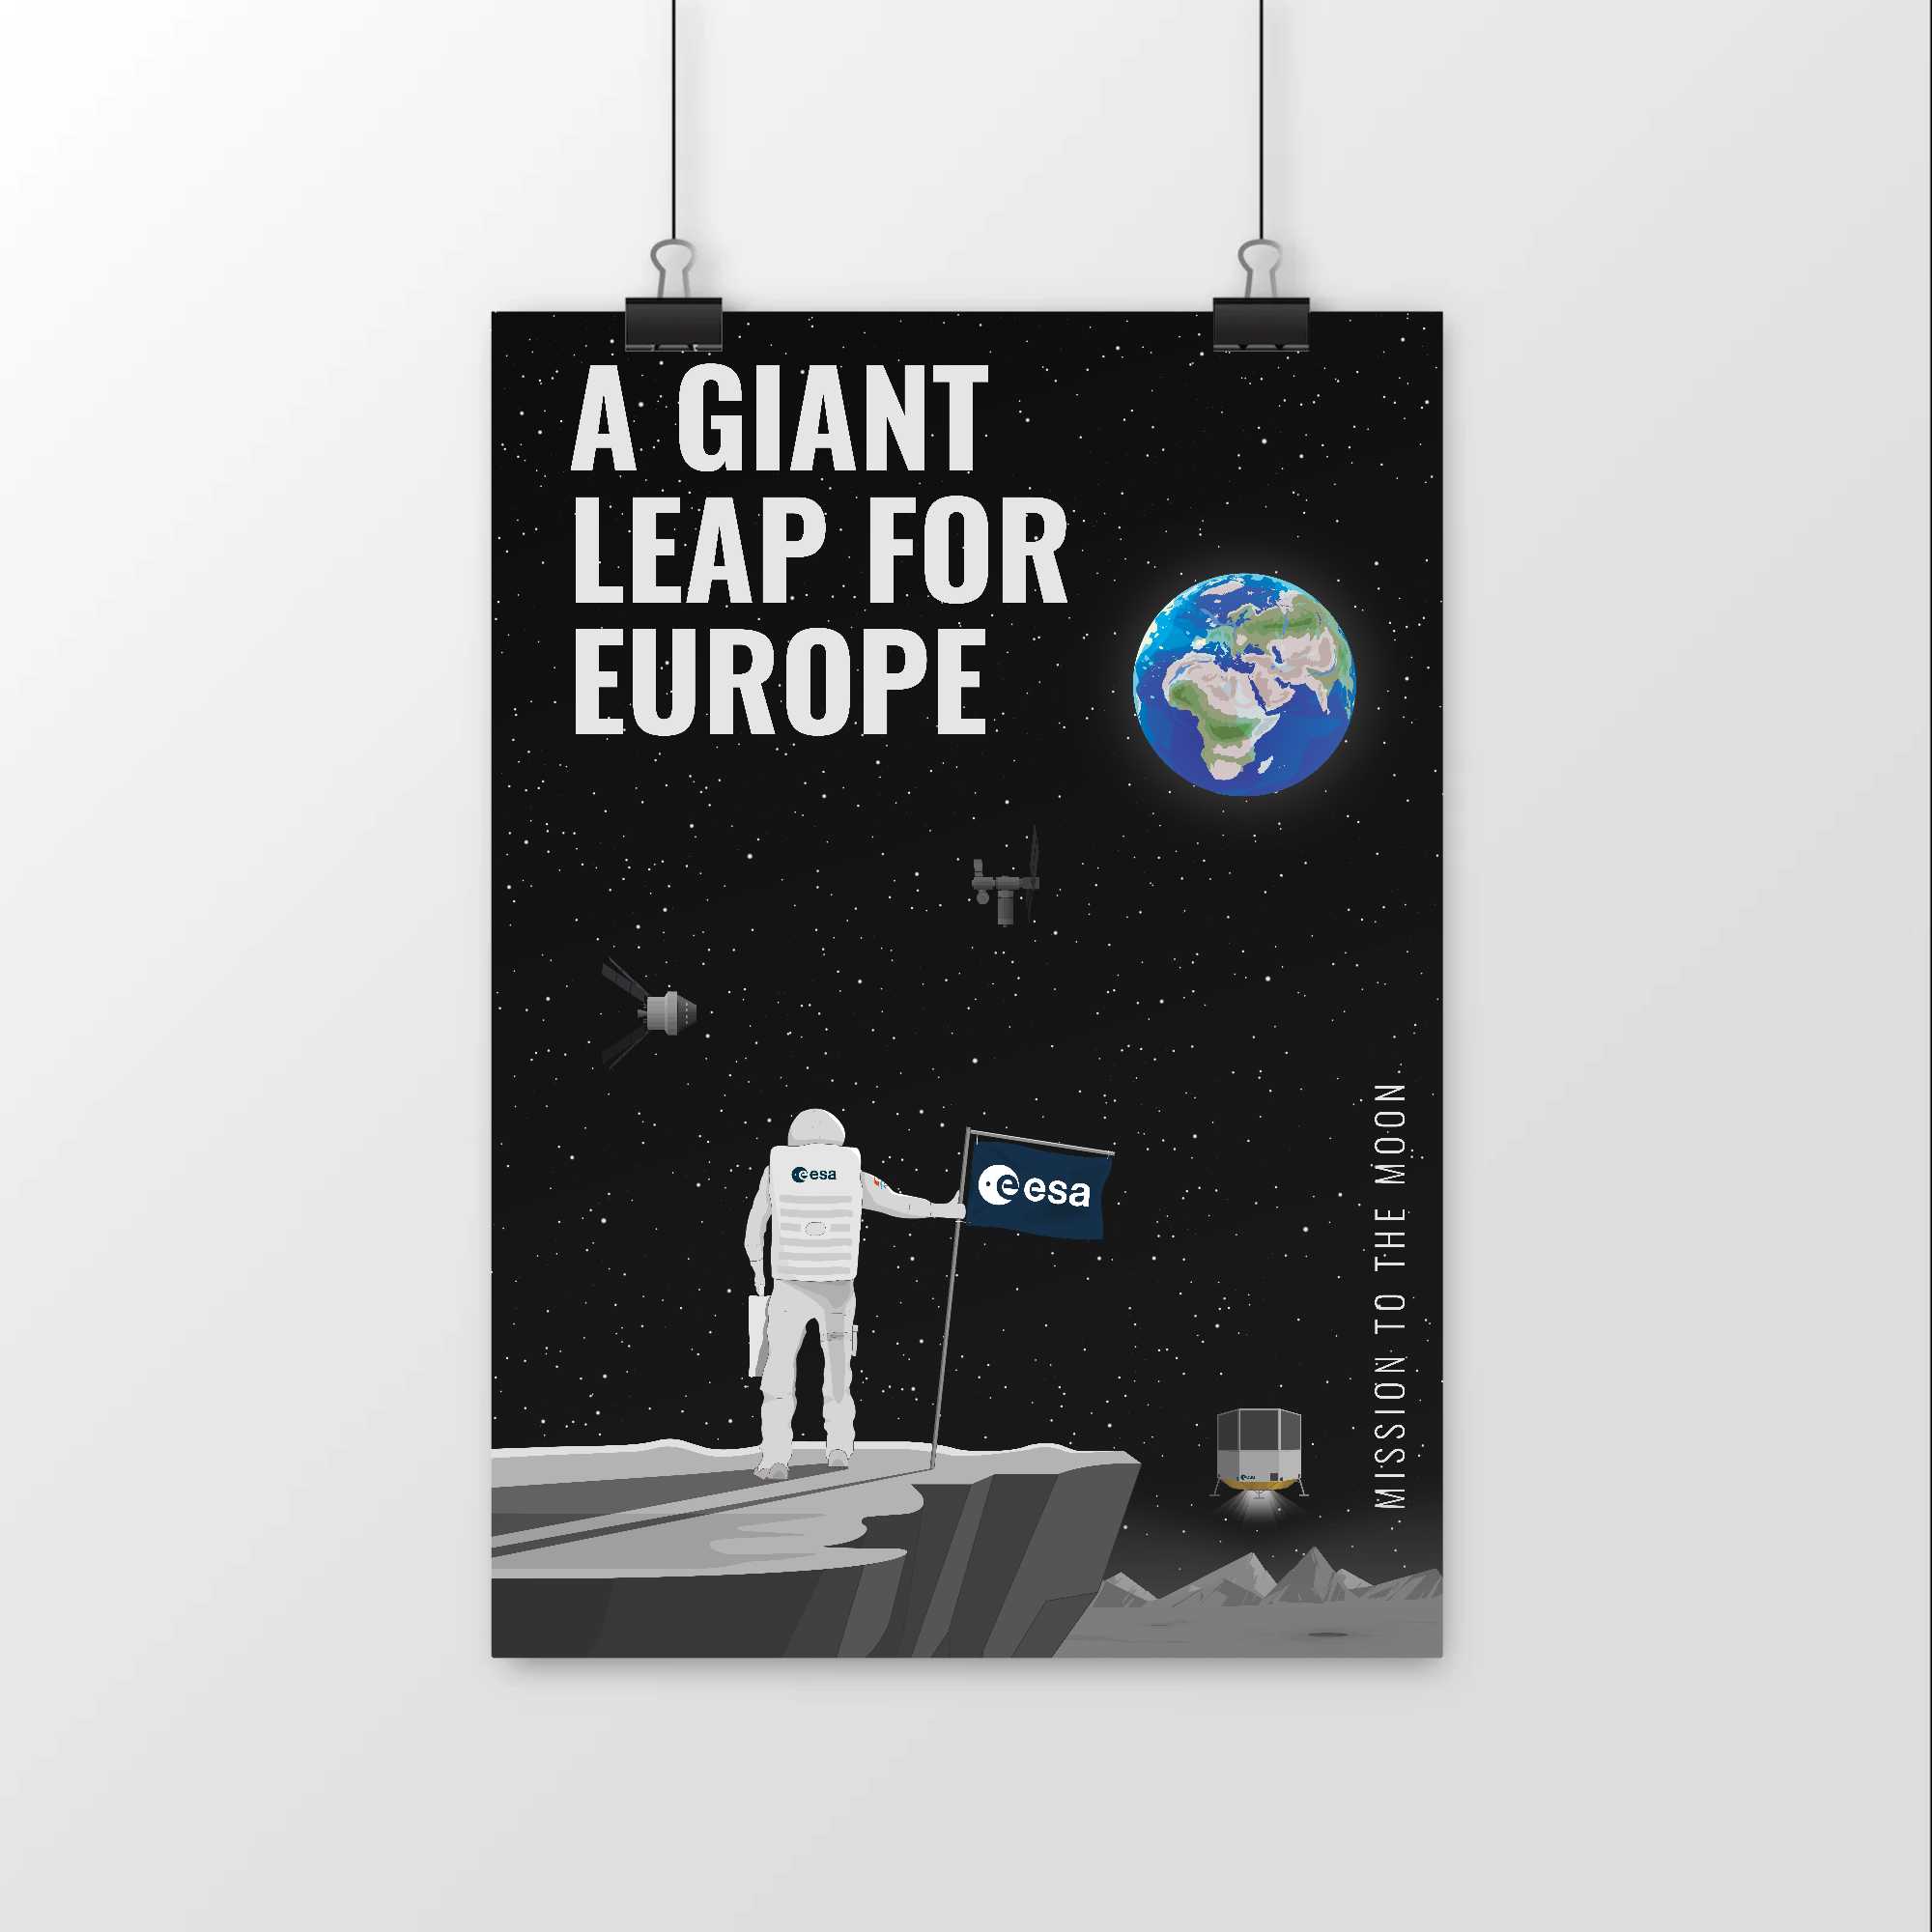 European Moon mission poster.